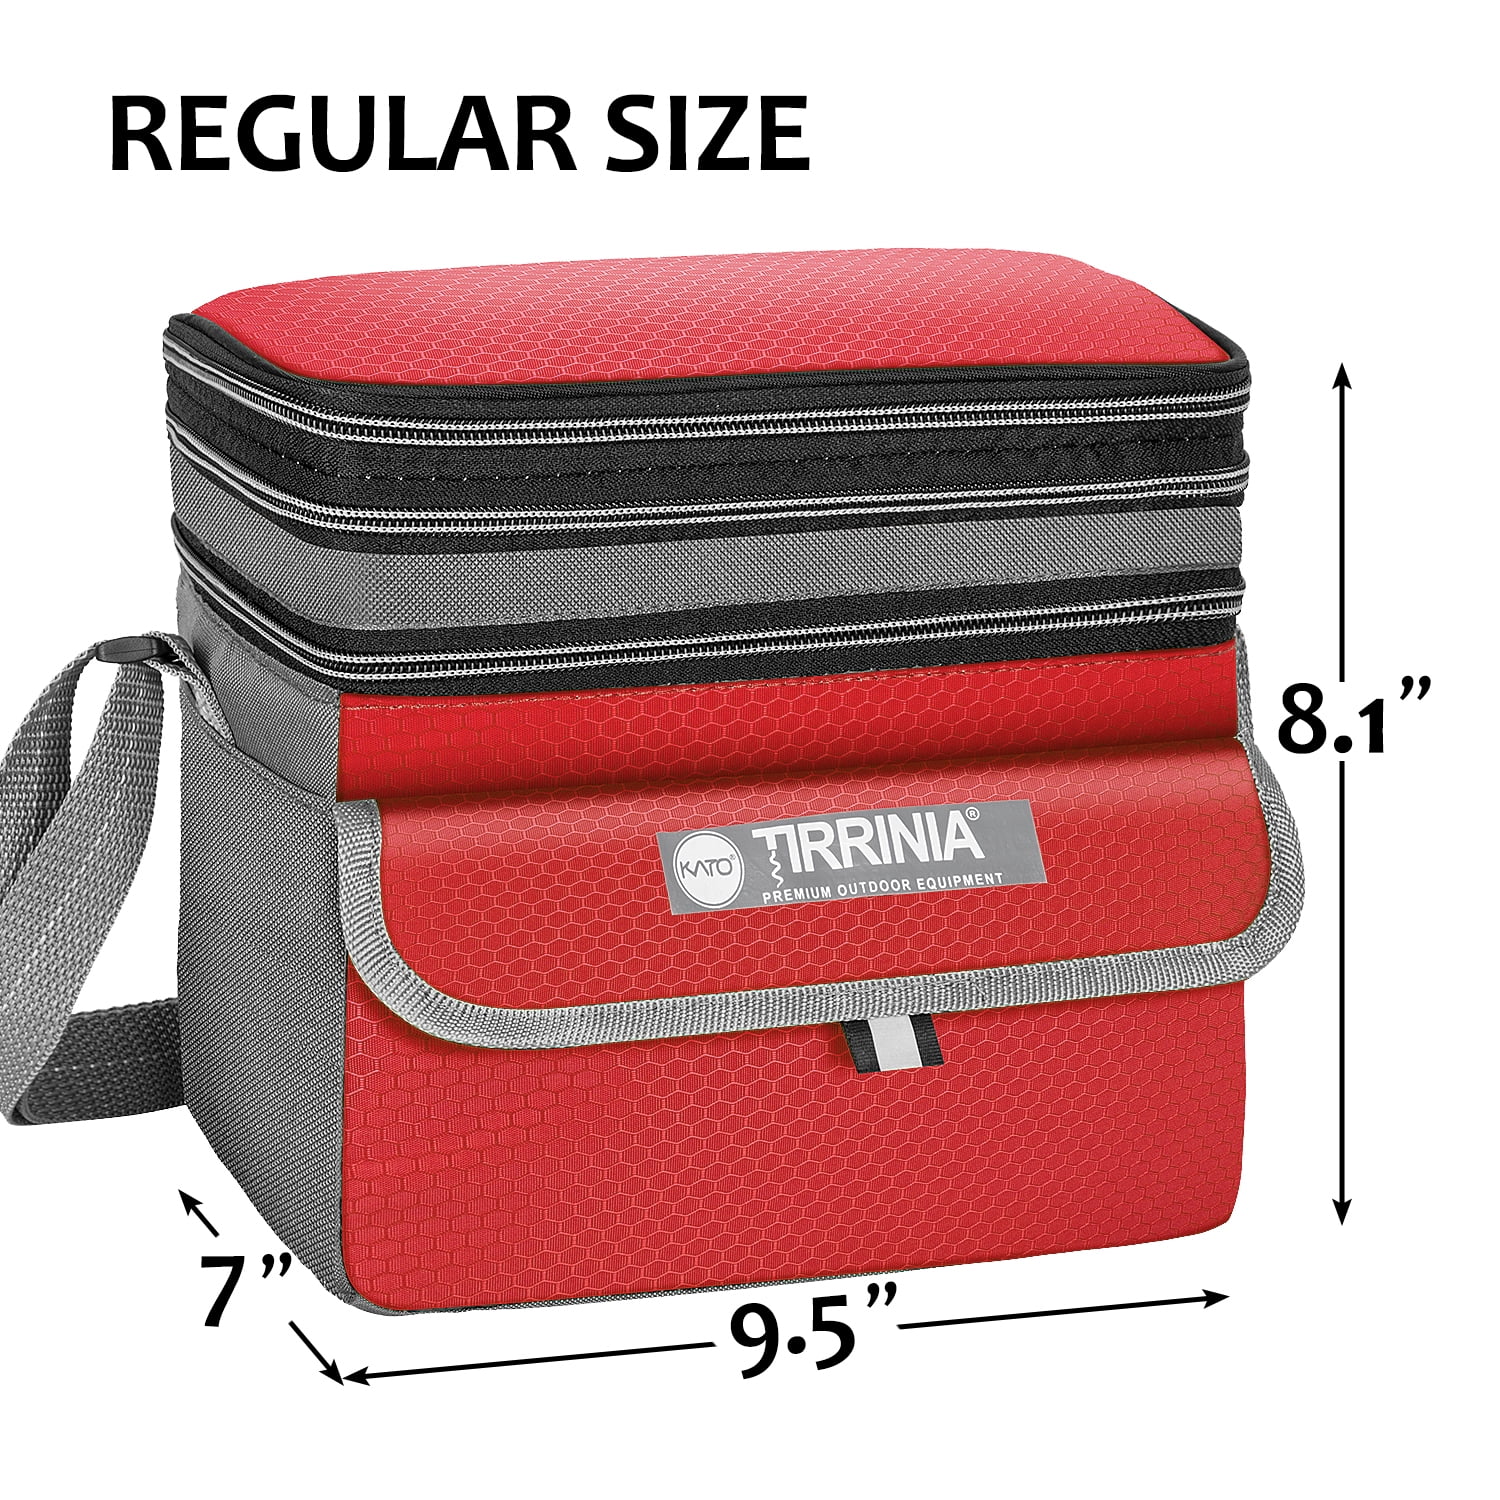 Kato Tirrinia Extra Large Insulated Lunch Bag Men Work, 14L Lunch Cooler Bag with Dual Compartment, Leakproof Lunch Bento Box Bag, Suitable for Work